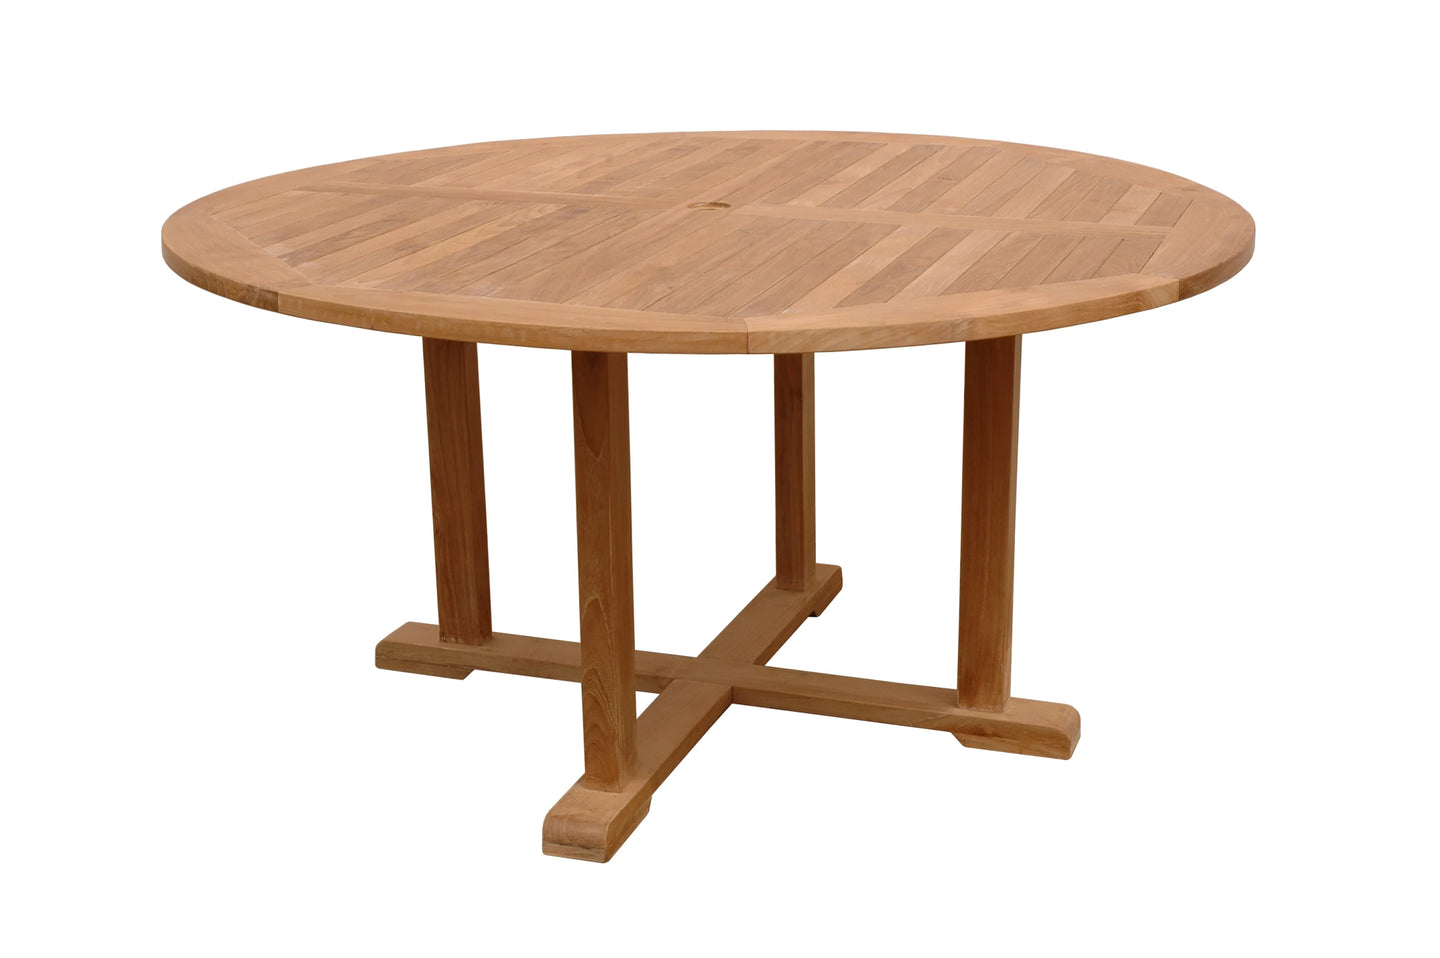 Tosca 5-Foot Round Table